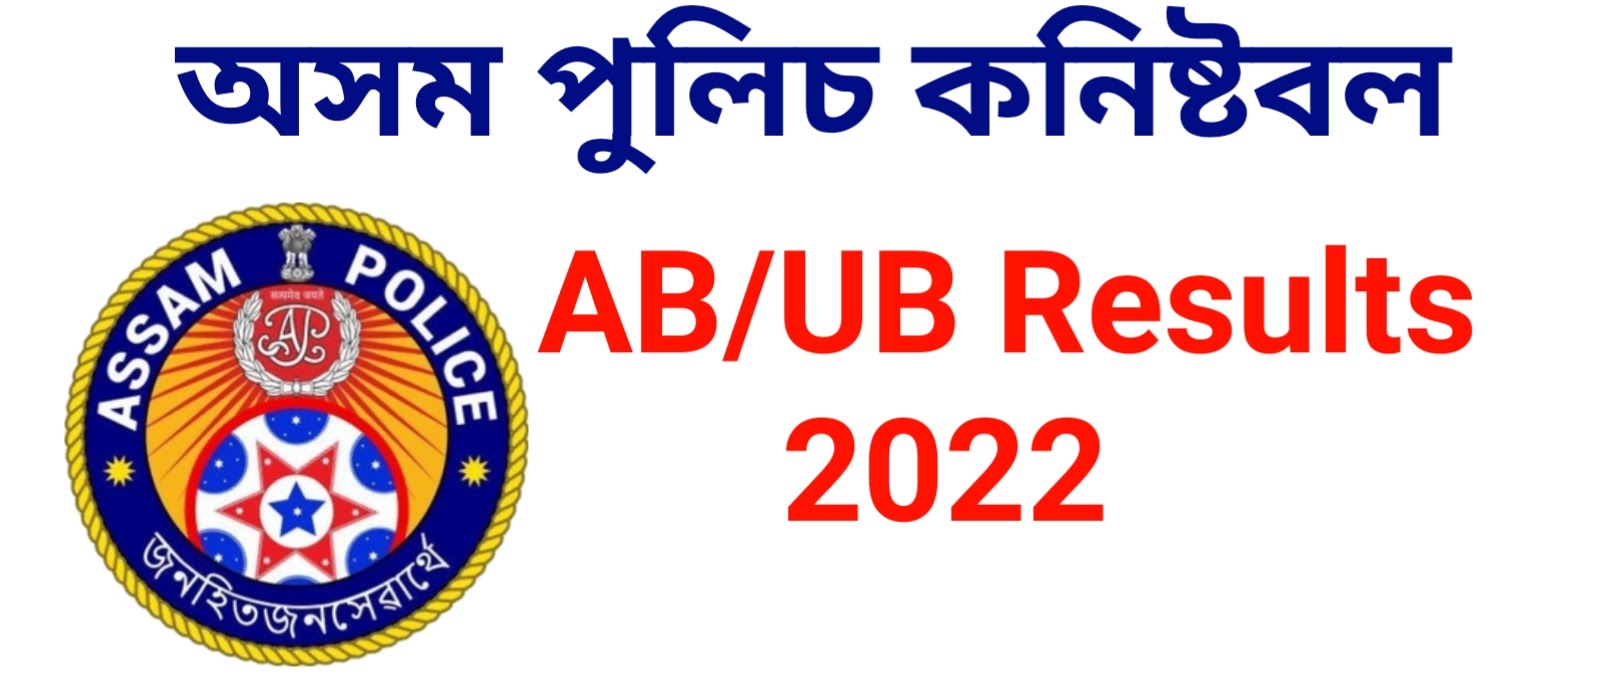 Check Assam Police constable final Results 2022 //Assam Police constable AB & UB , APRO, Guardsman And AISF Reslts